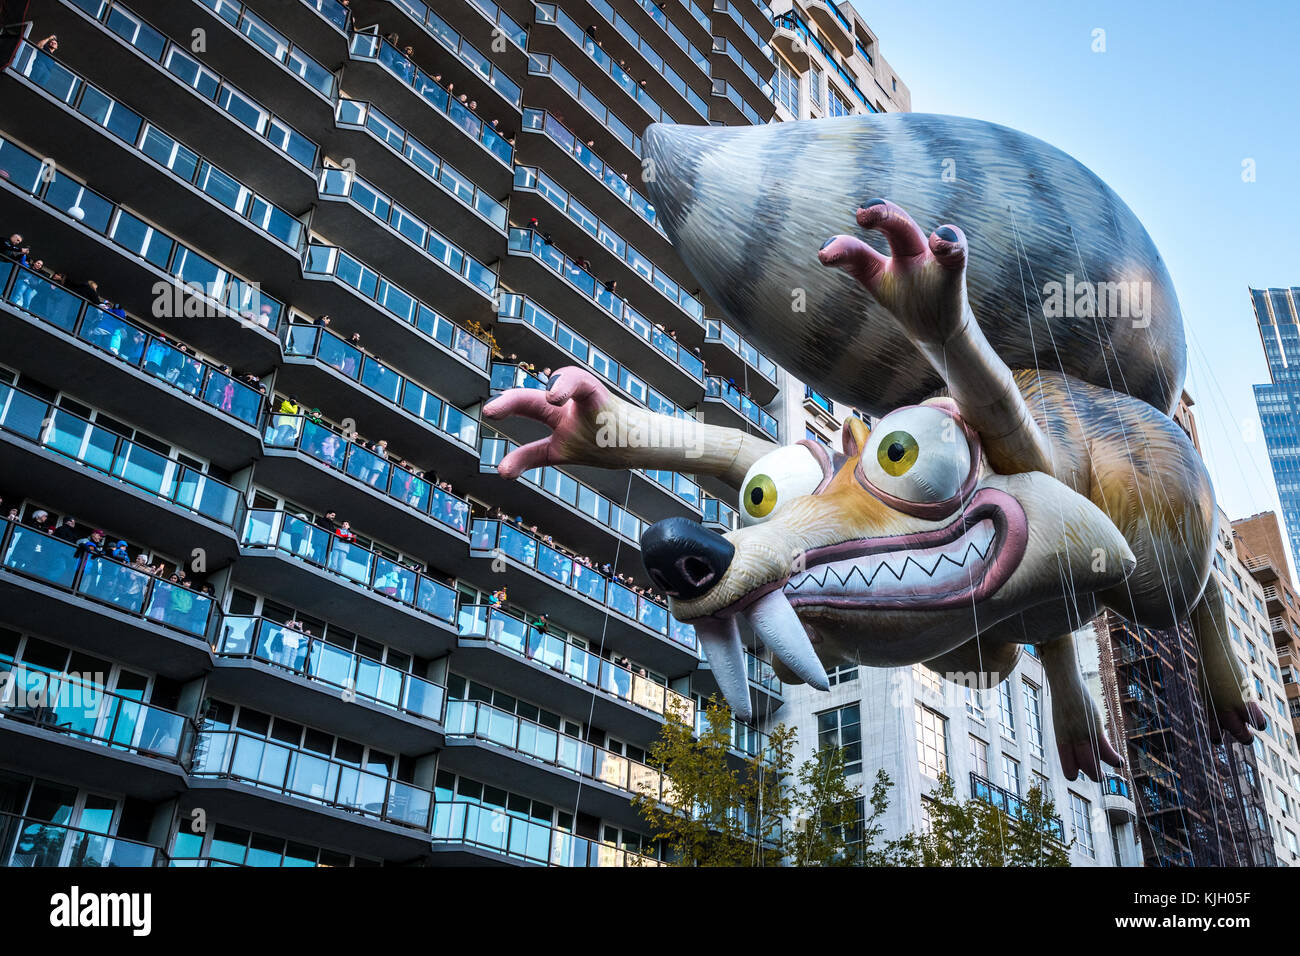 New York, USA. 23rd Nov, 2017. New York, USA, A balloon of Ice Age's Scrat participates in the 2017 Macy's Thanksgiving Day parade as spectators watch from their balconies overlooking New York's Central Park South. Credit: Enrique Shore/Alamy Live News Stock Photo